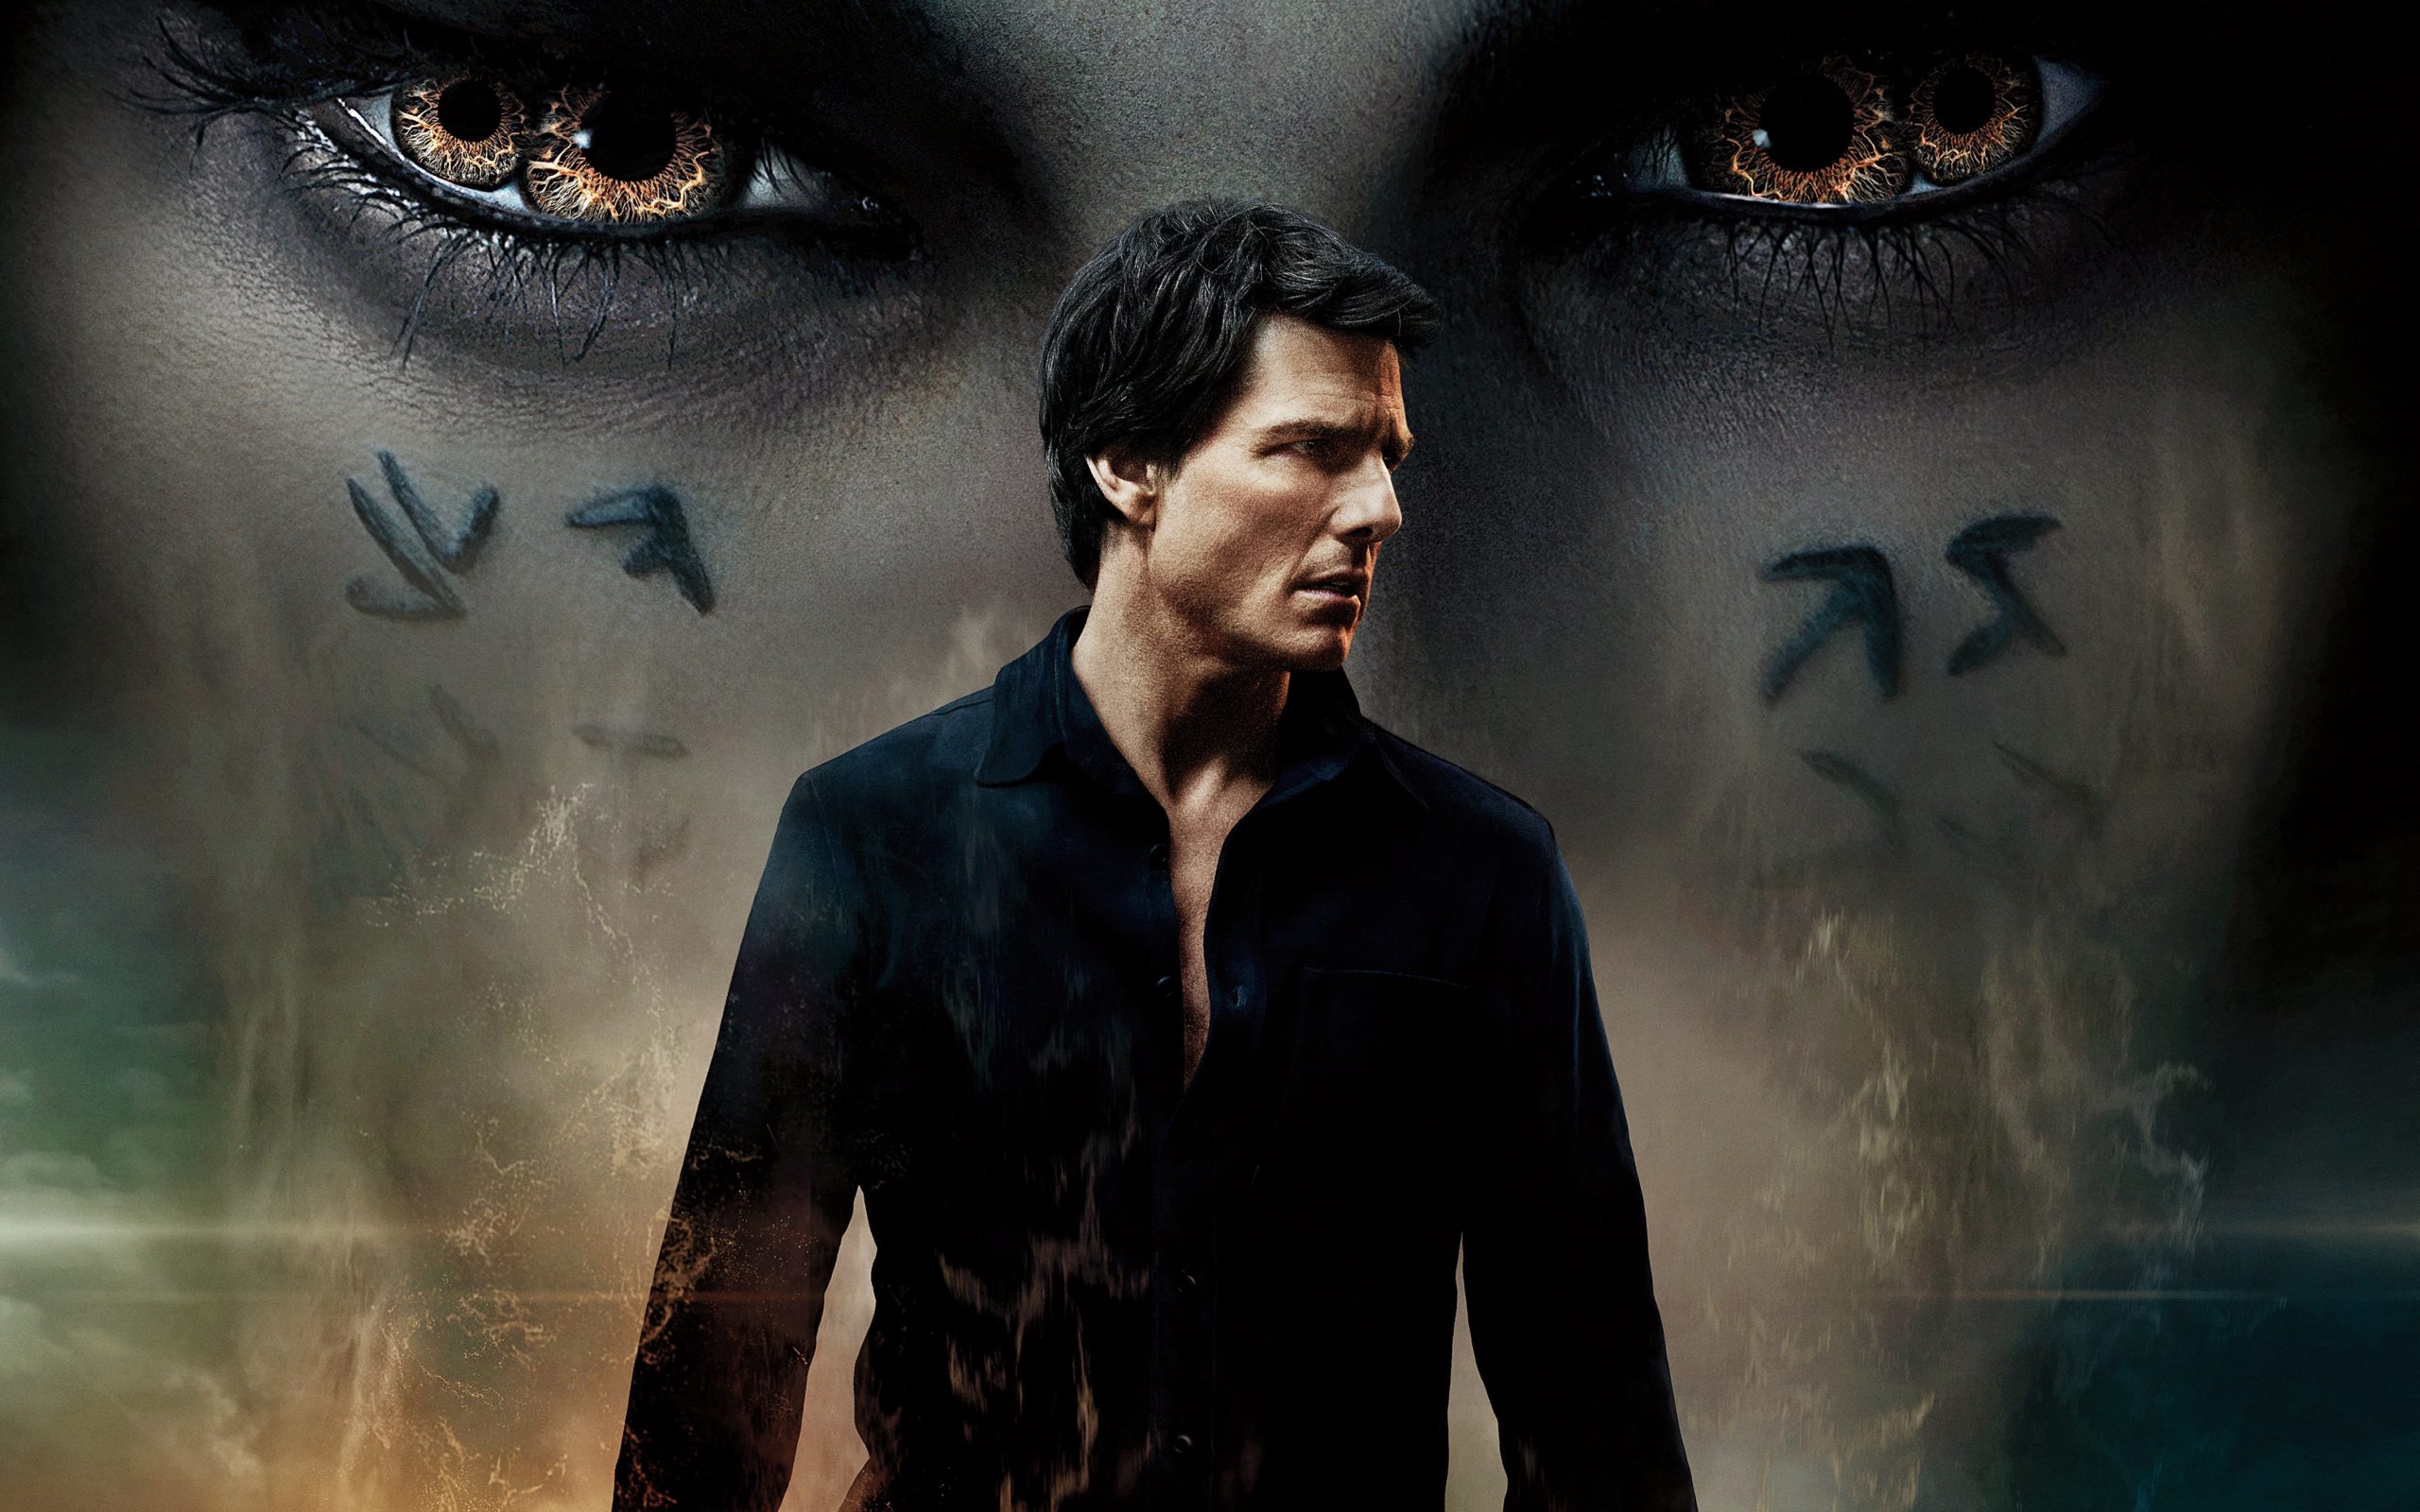 Did Tom Cruise Have Too Much Creative Control on The Mummy? - Den of Geek